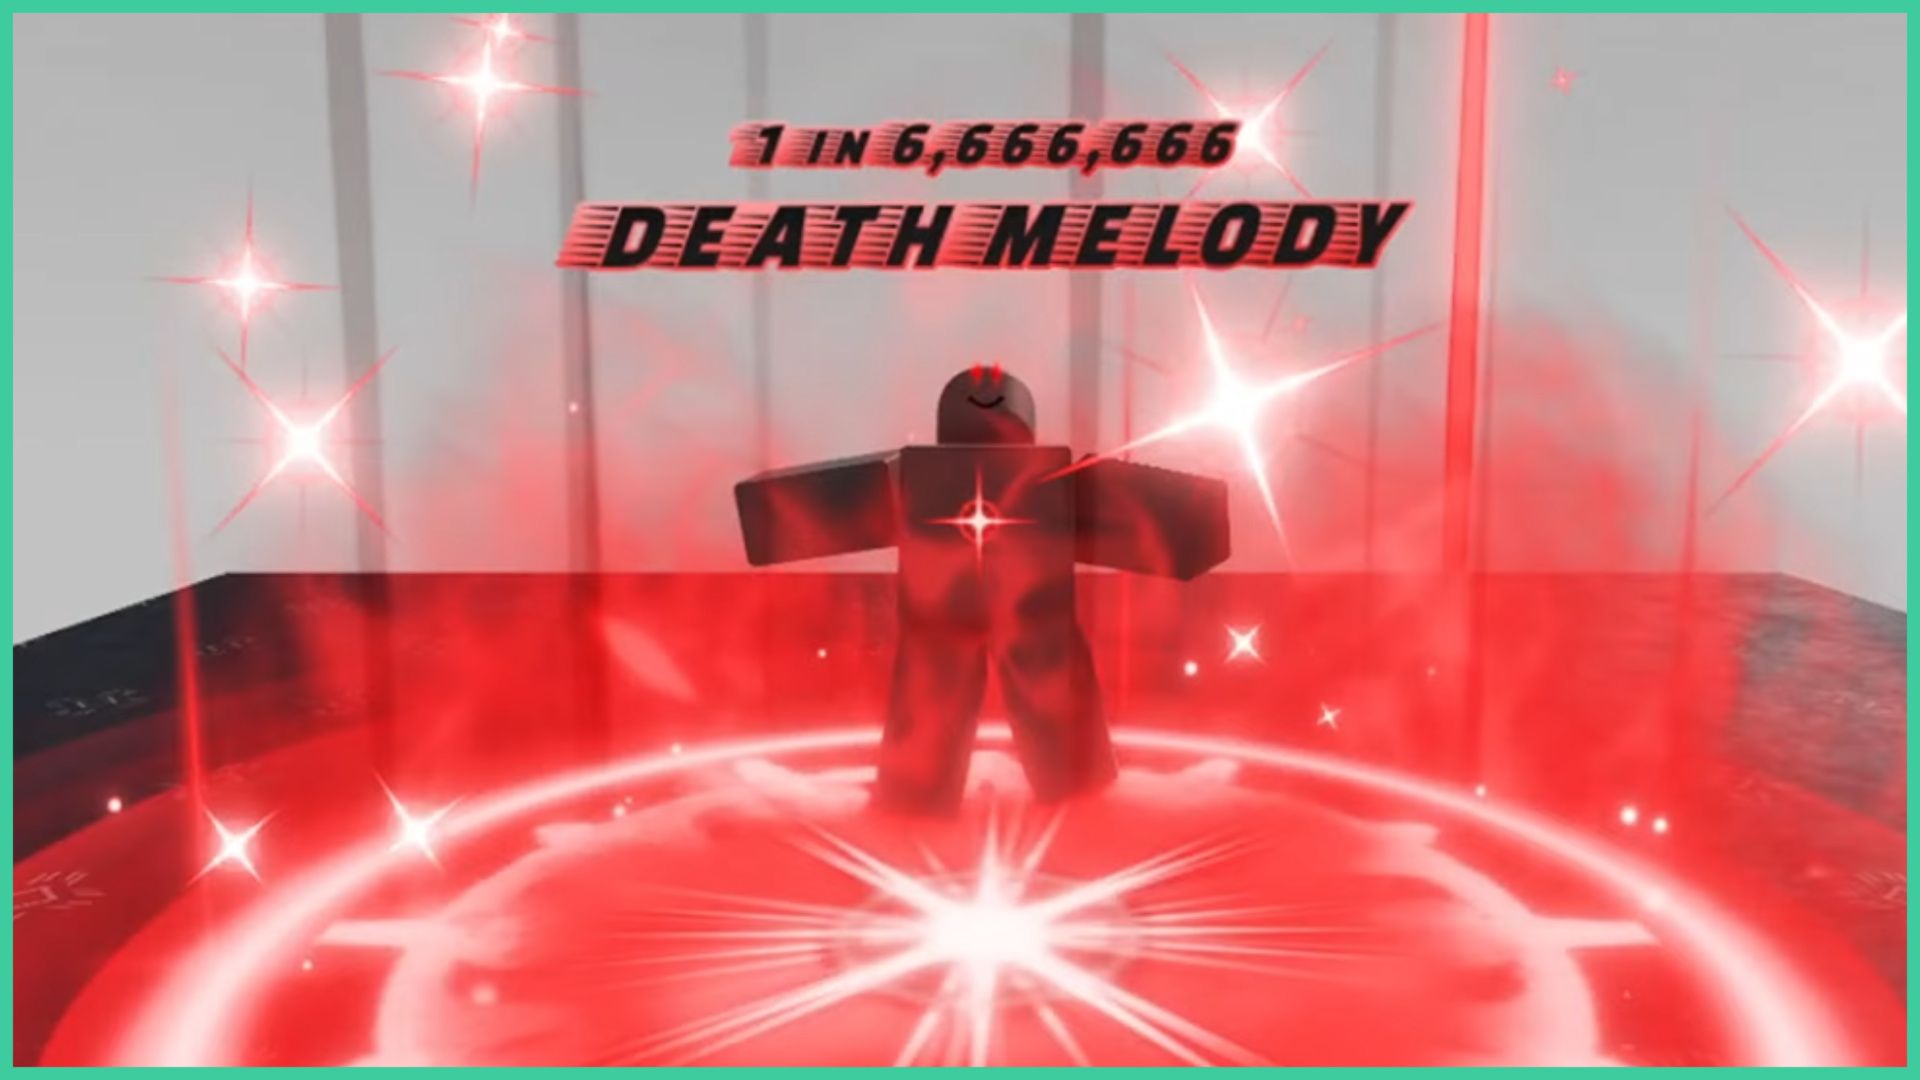 feature image for our hades rng death melody guide, the image is a screenshot of the death melody aura which has a large red circle on the ground as the player floats in the air with glowing red eyes, there are stars around them and beams of light as the avatar has a glowing star on their chest